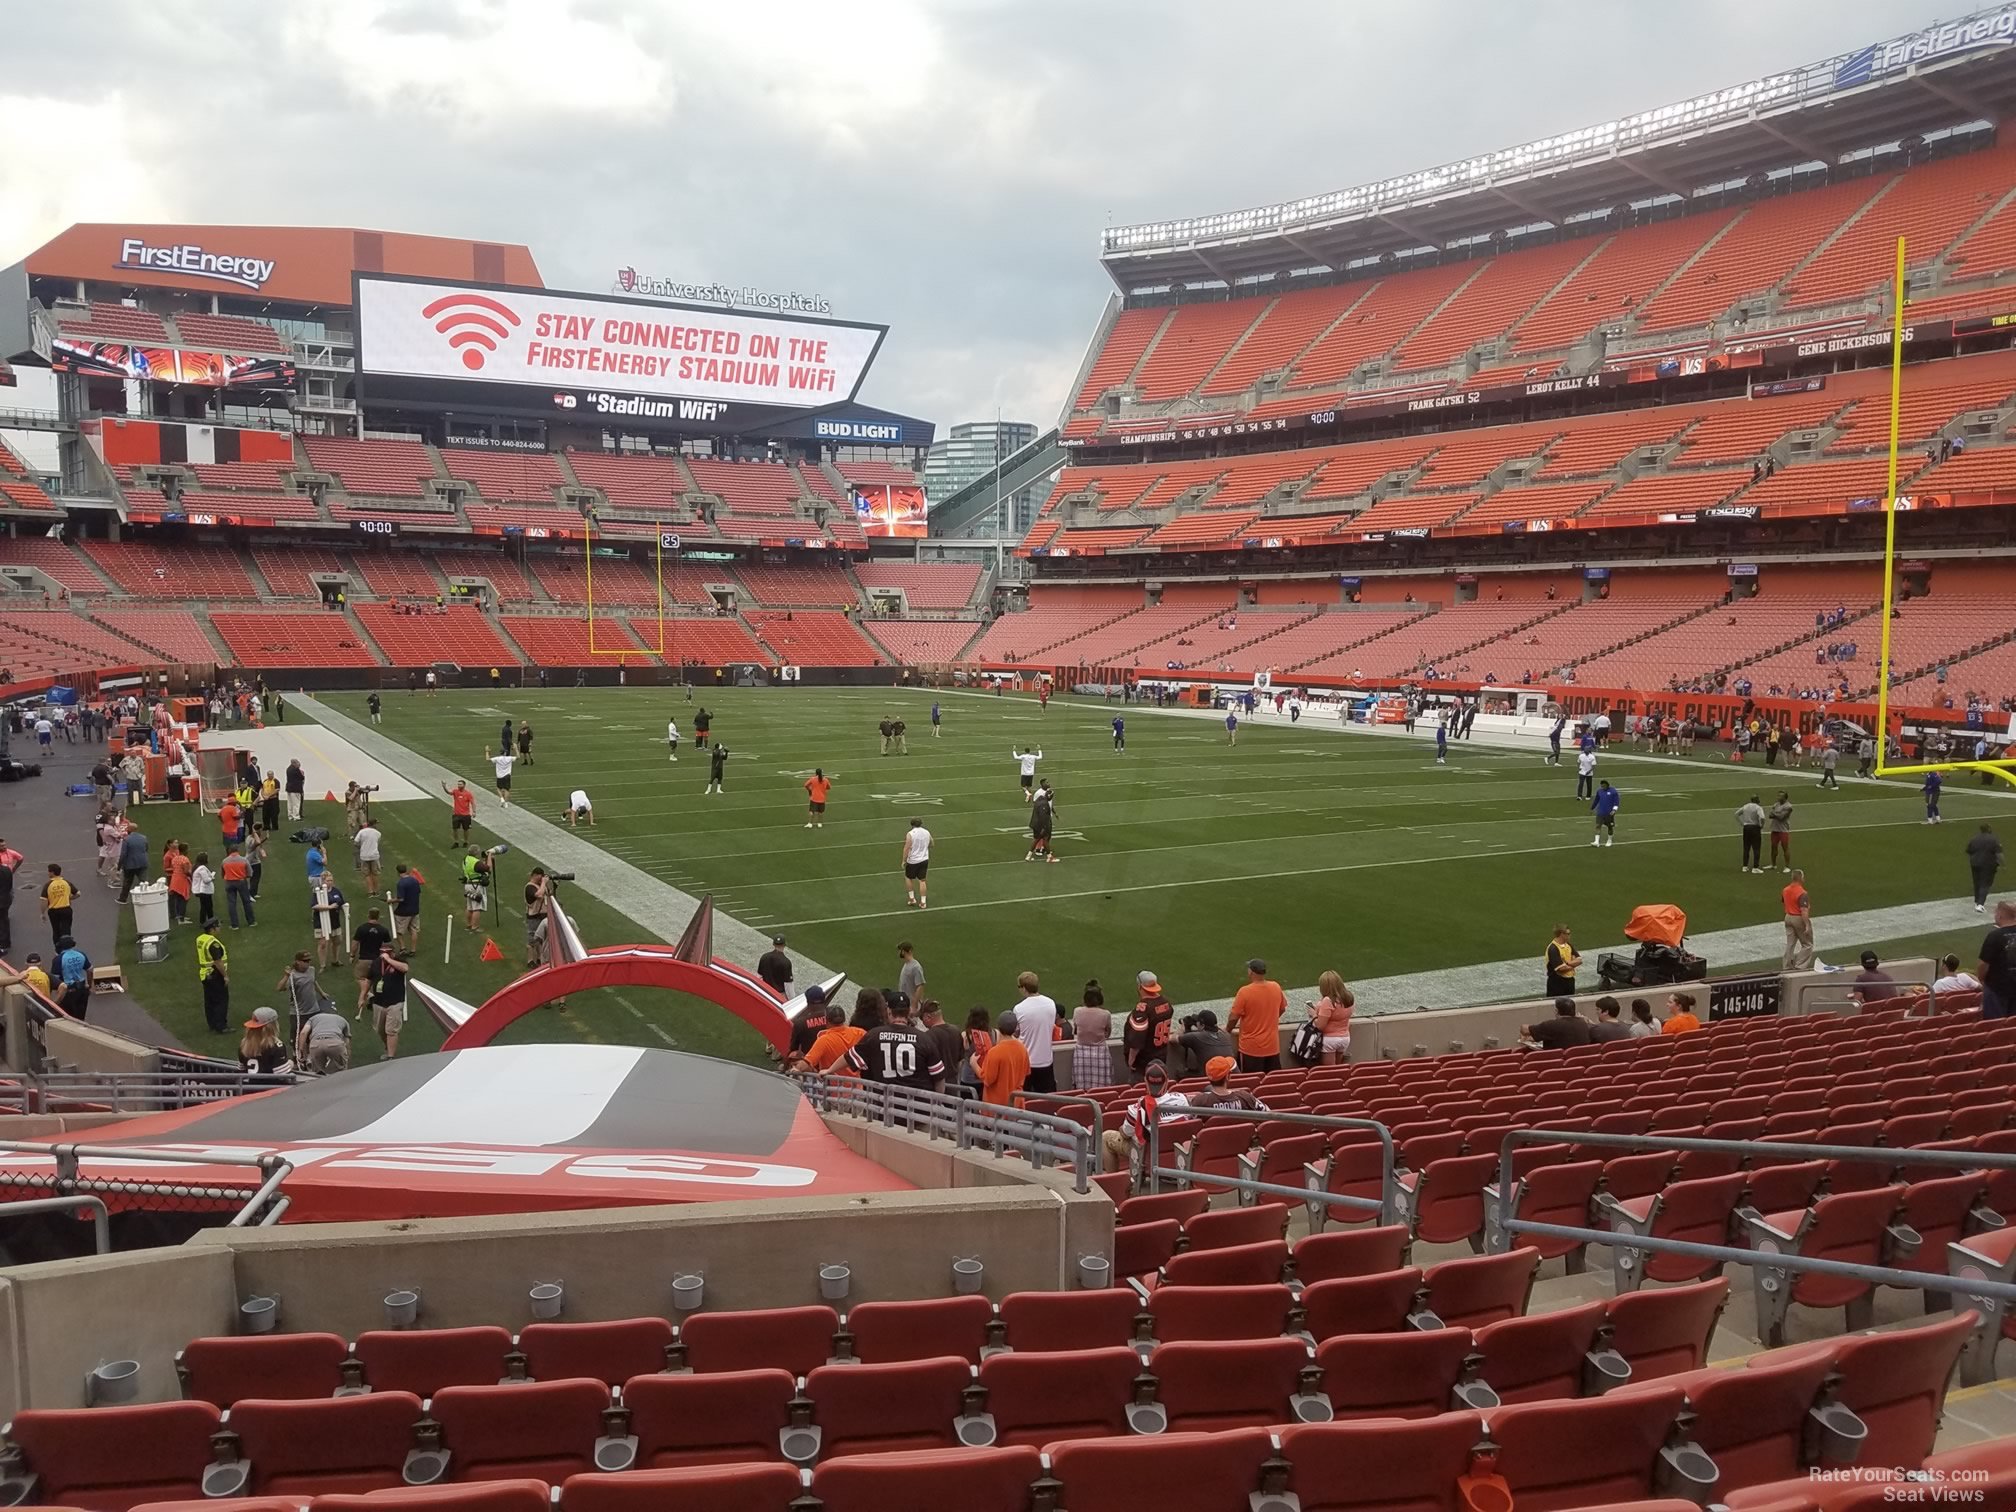 section 144, row 17 seat view  - cleveland browns stadium